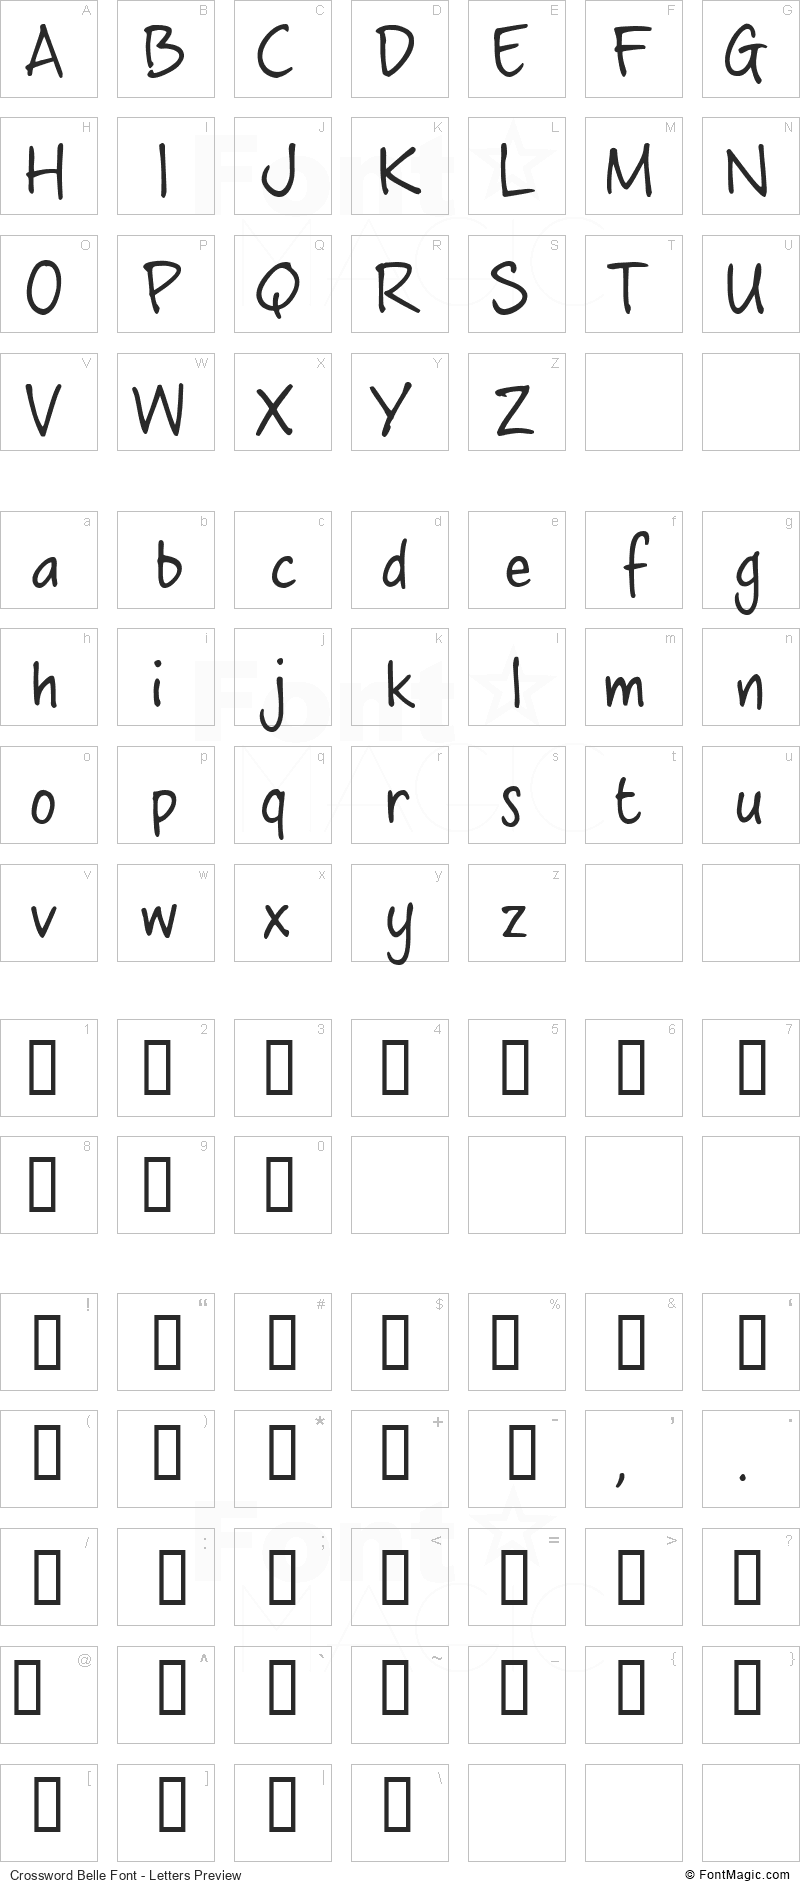 Crossword Belle Font - All Latters Preview Chart